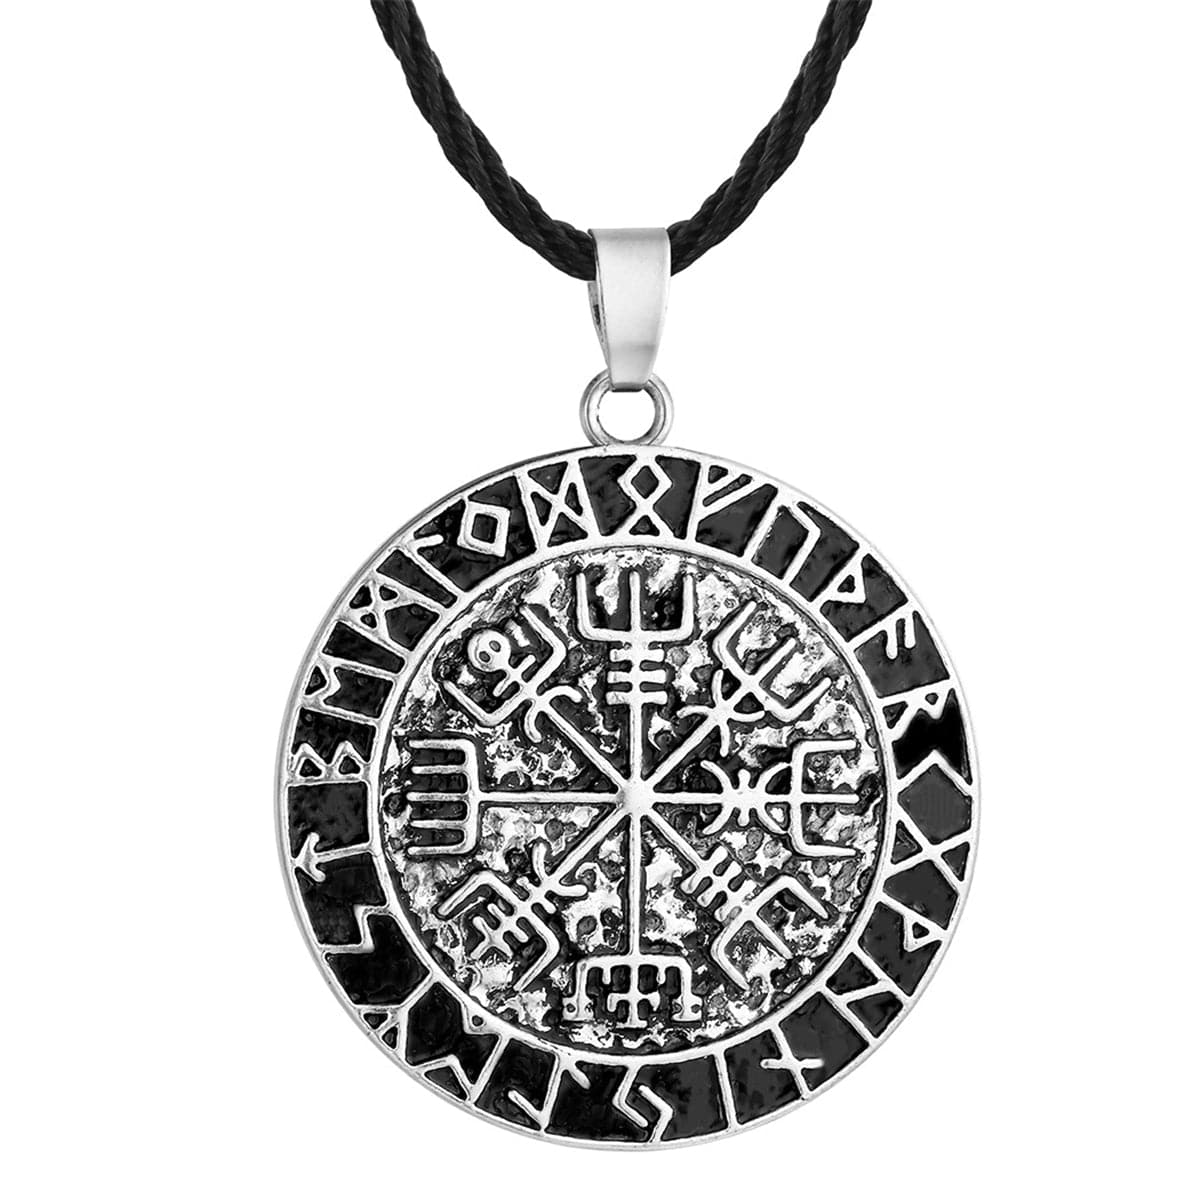 Silver-Plated & Black Compass Pendant Necklace